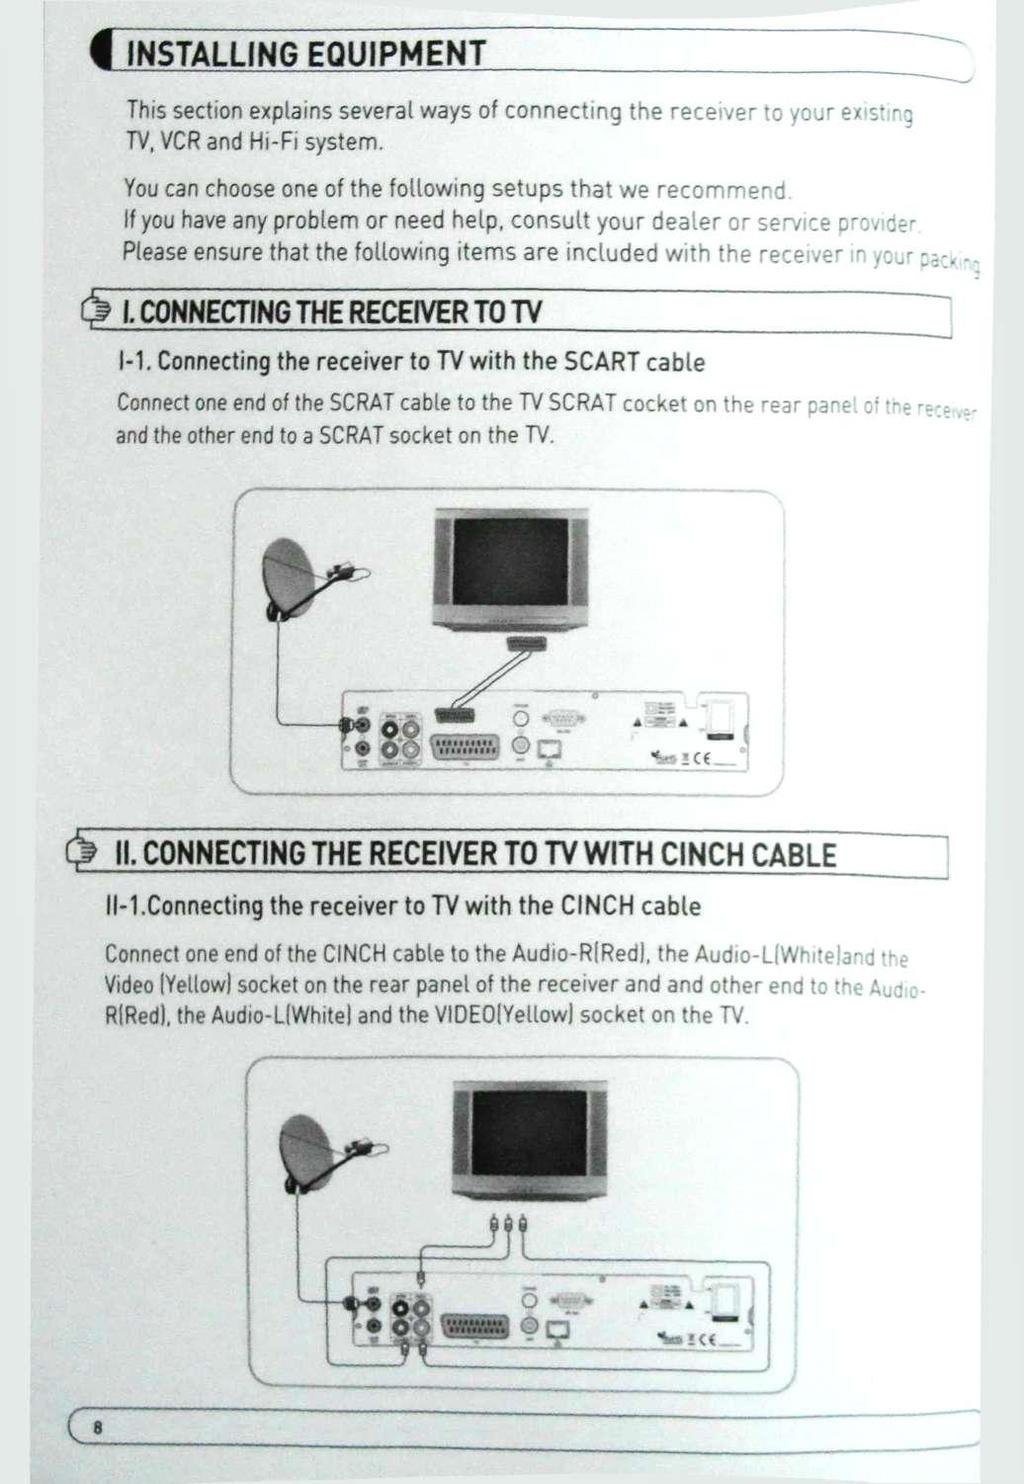 # INSTALLING EQUIPMENT This section explains several ways of connecting the receiver to your existing TV. VCR and Hi-Fi system. You can choose one of the following setups that we recommend.